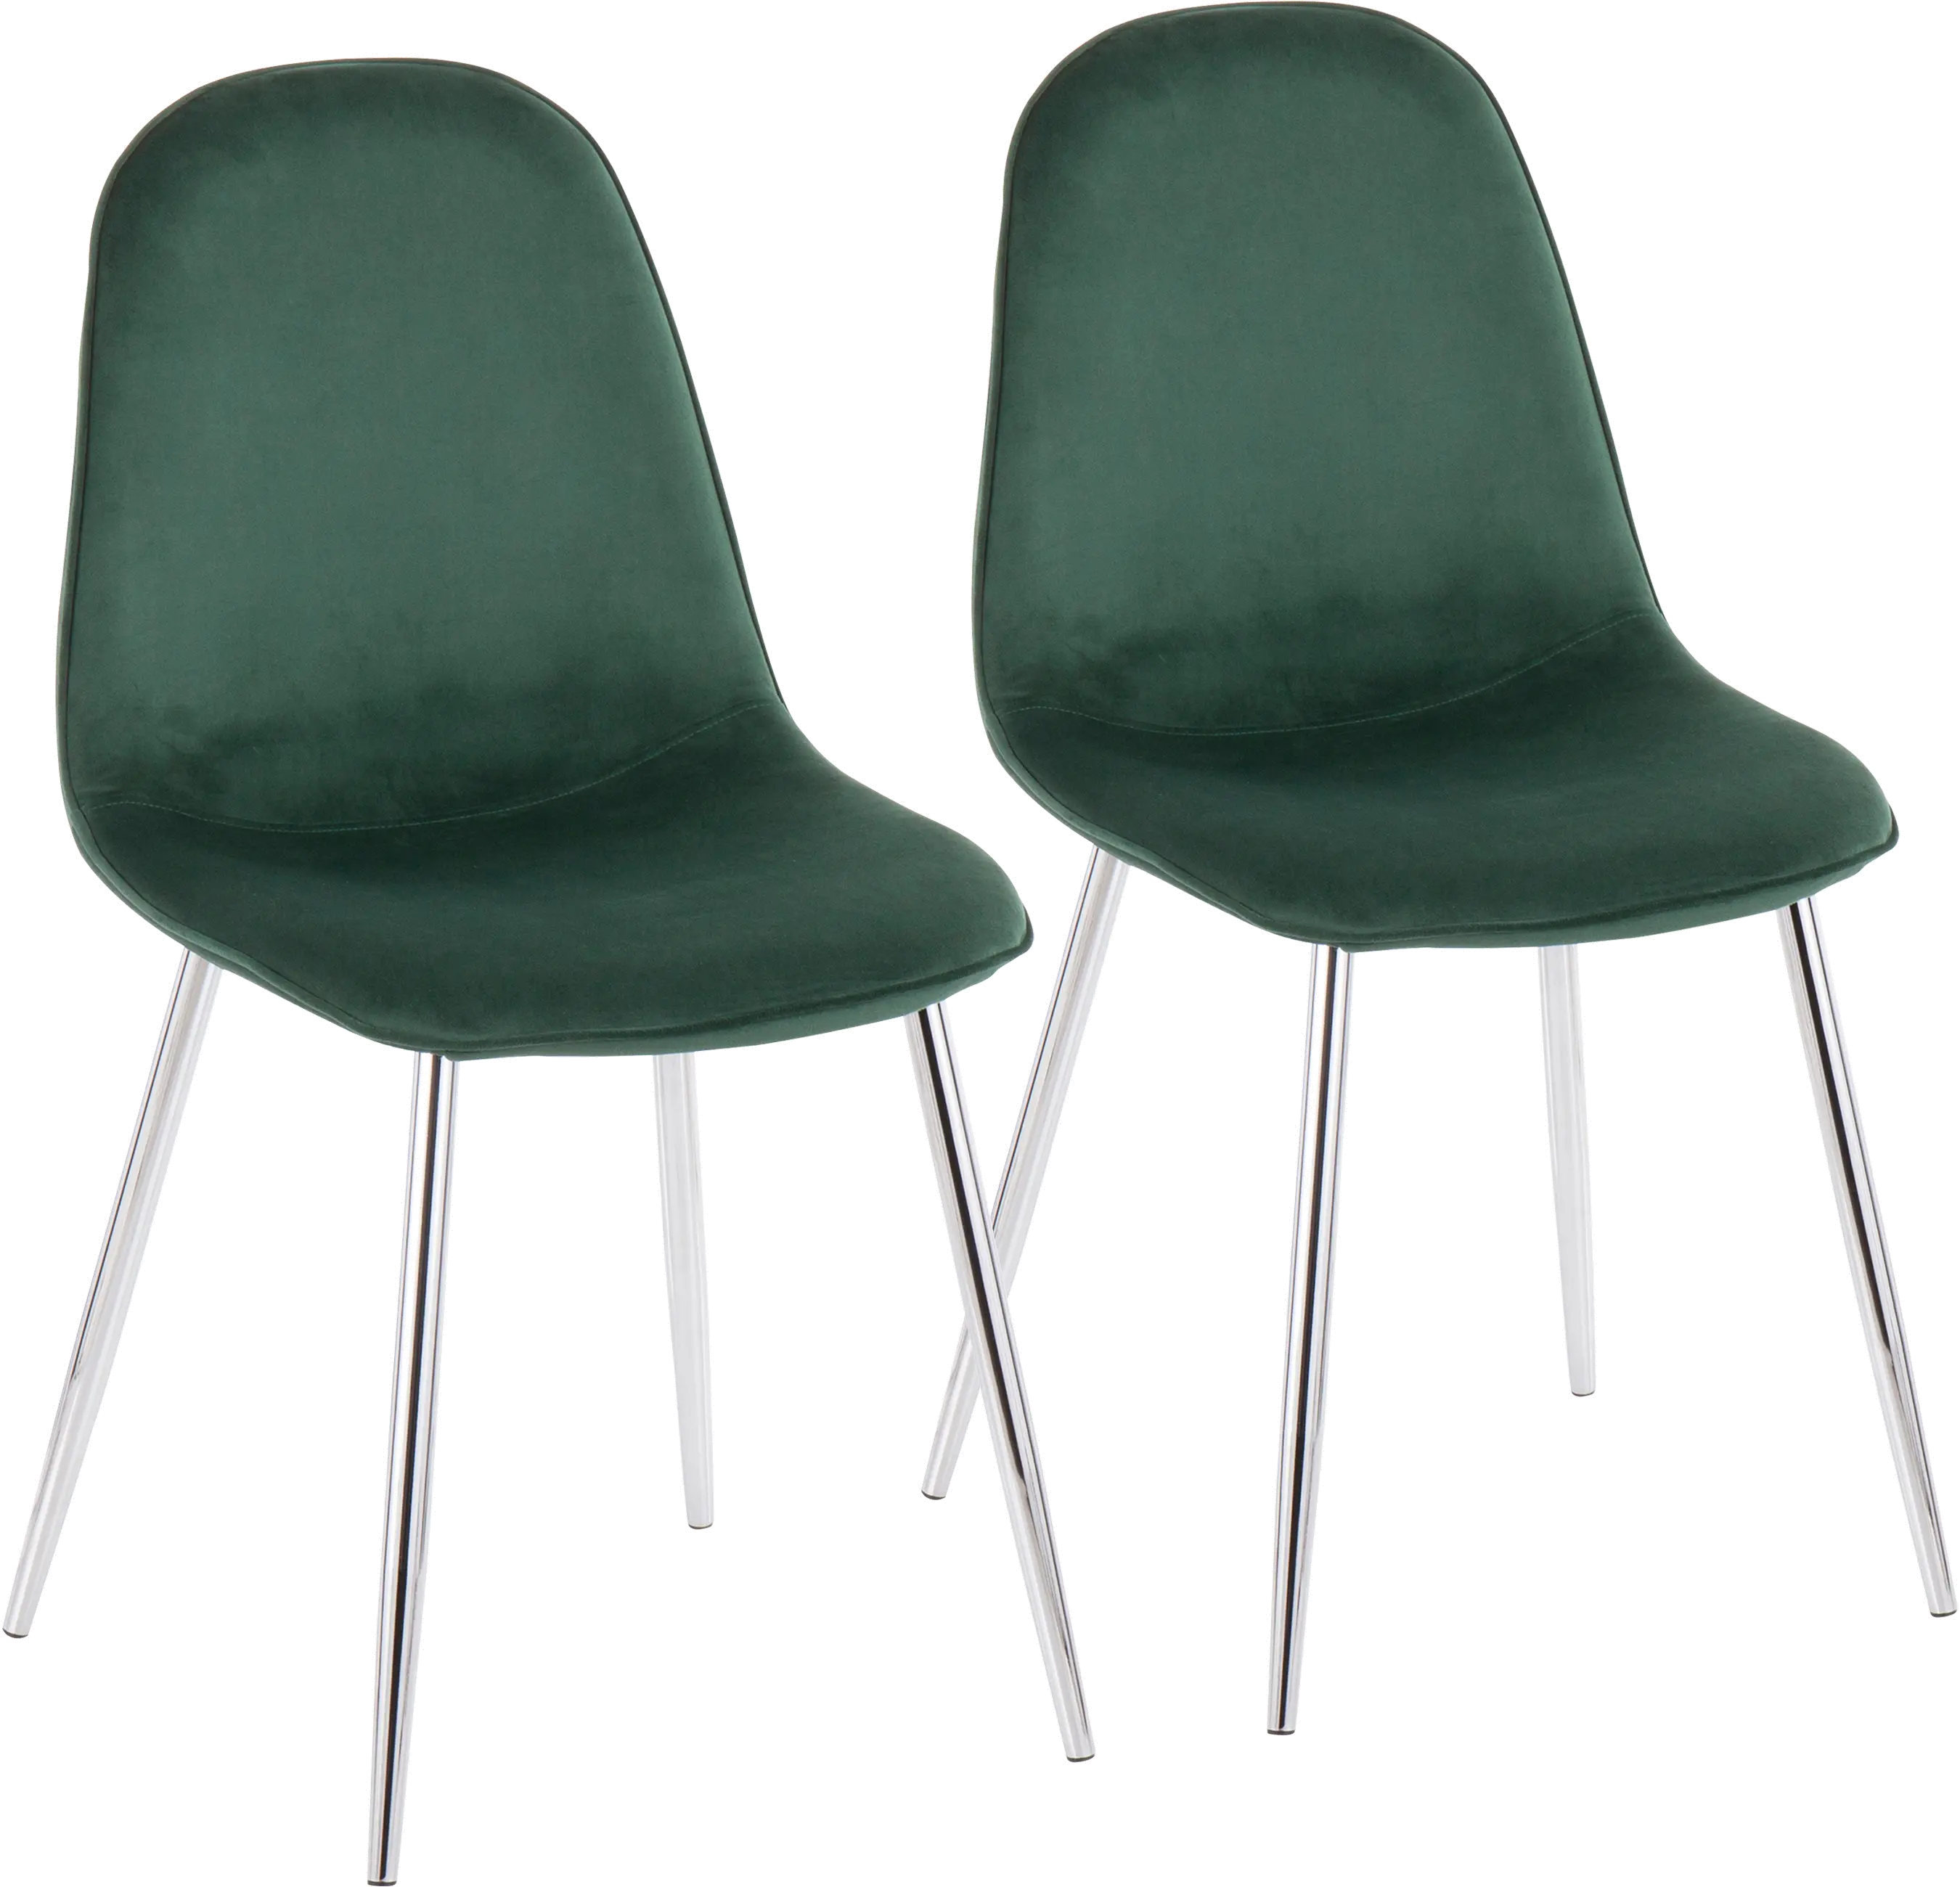 Contemporary Green and Chrome Dining Room Chair (Set of 2) - Pebble